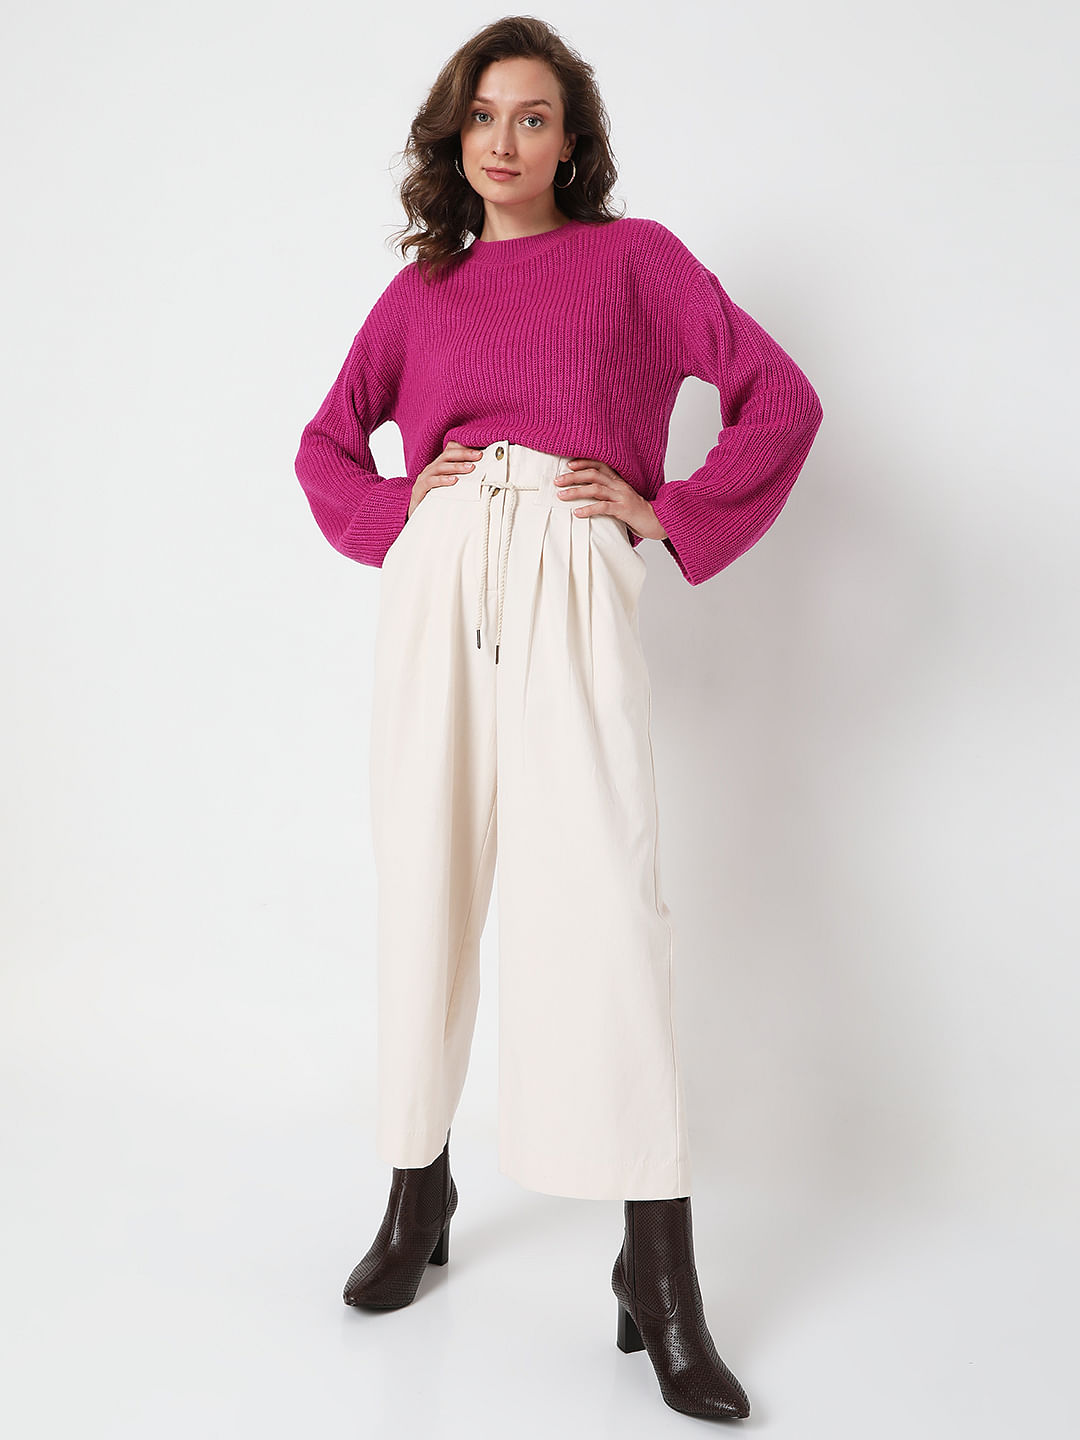 Buy high waist trousers with shoulder straps in India @ Limeroad